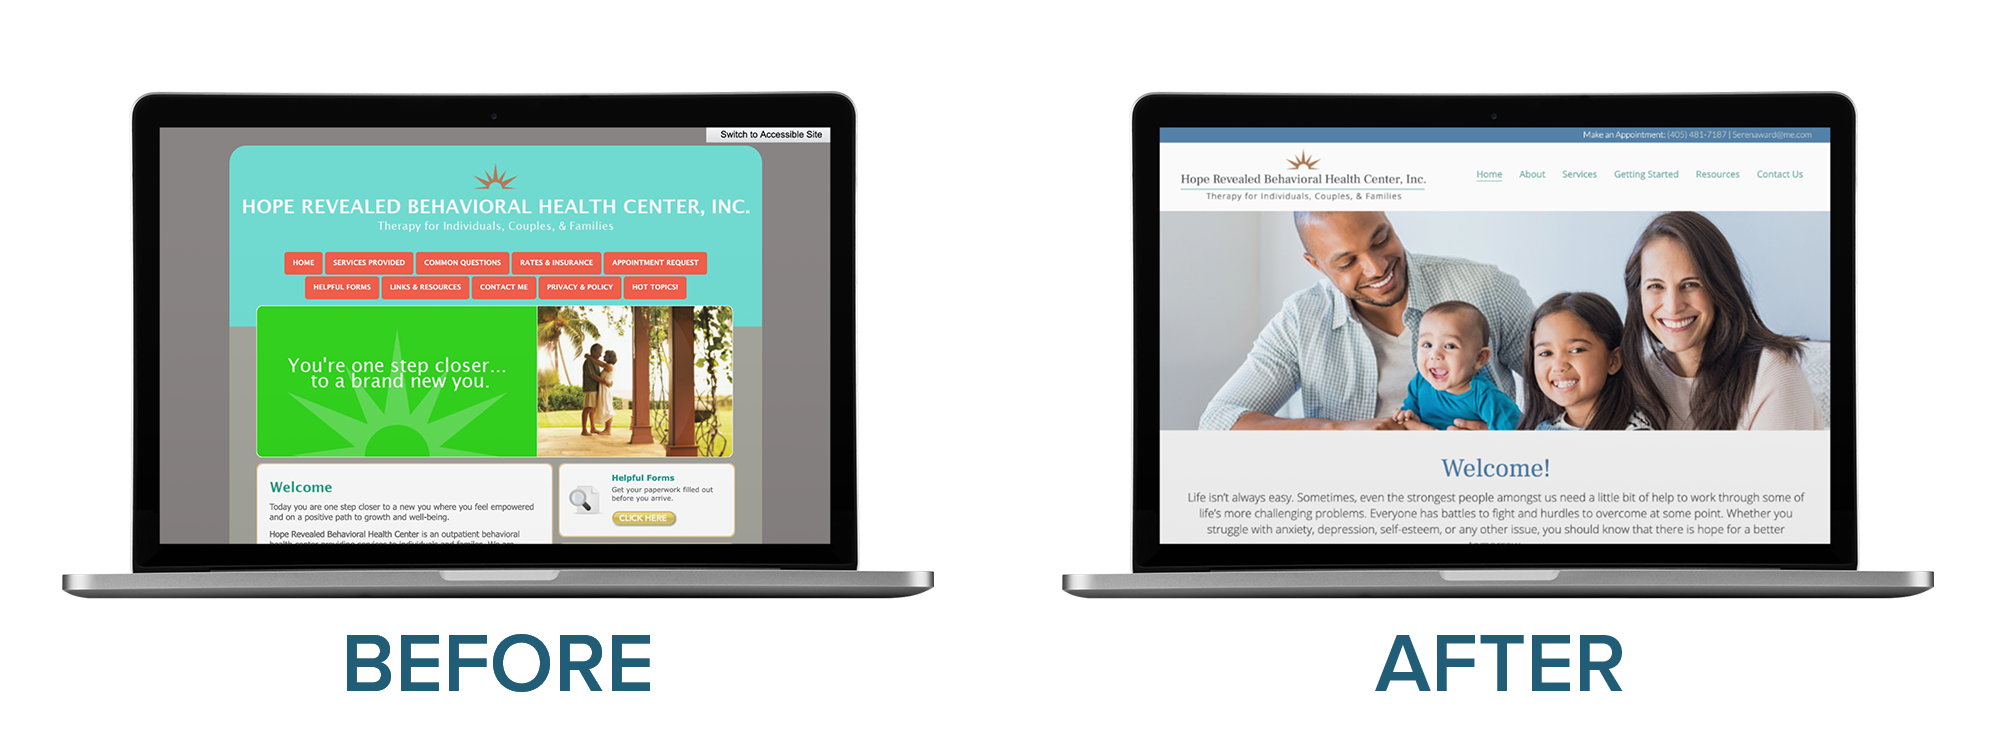 Hope Revealed Behavioral Health Center, Inc. Website Redesign | Before & After Website Transformations: From TherapySites to Brighter Vision | Brighter Vision Web Solutions | Marketing Blog for Therapists